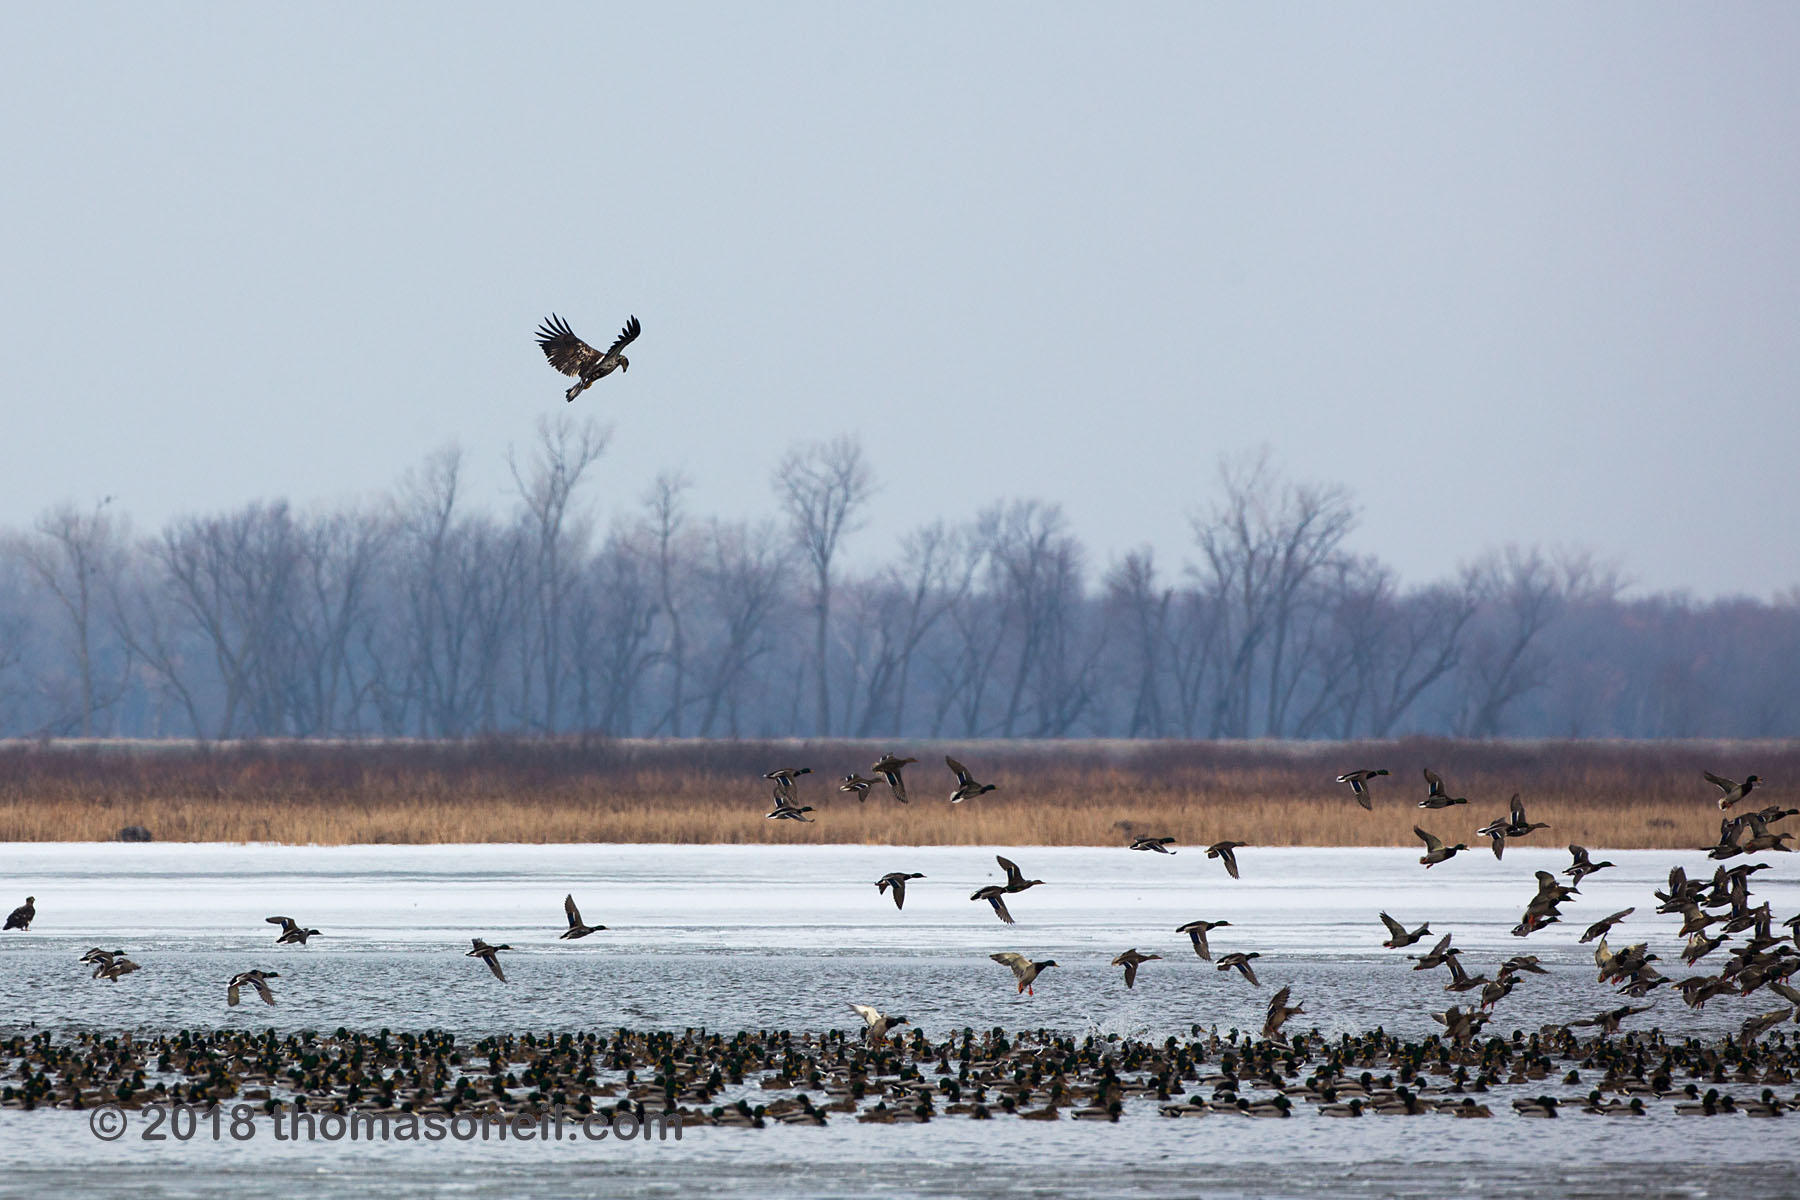 Bald eagle trying to stir up the ducks, Loess Bluffs National Wildlife Refuge, Missouri, December 2018.  Click for next photo.